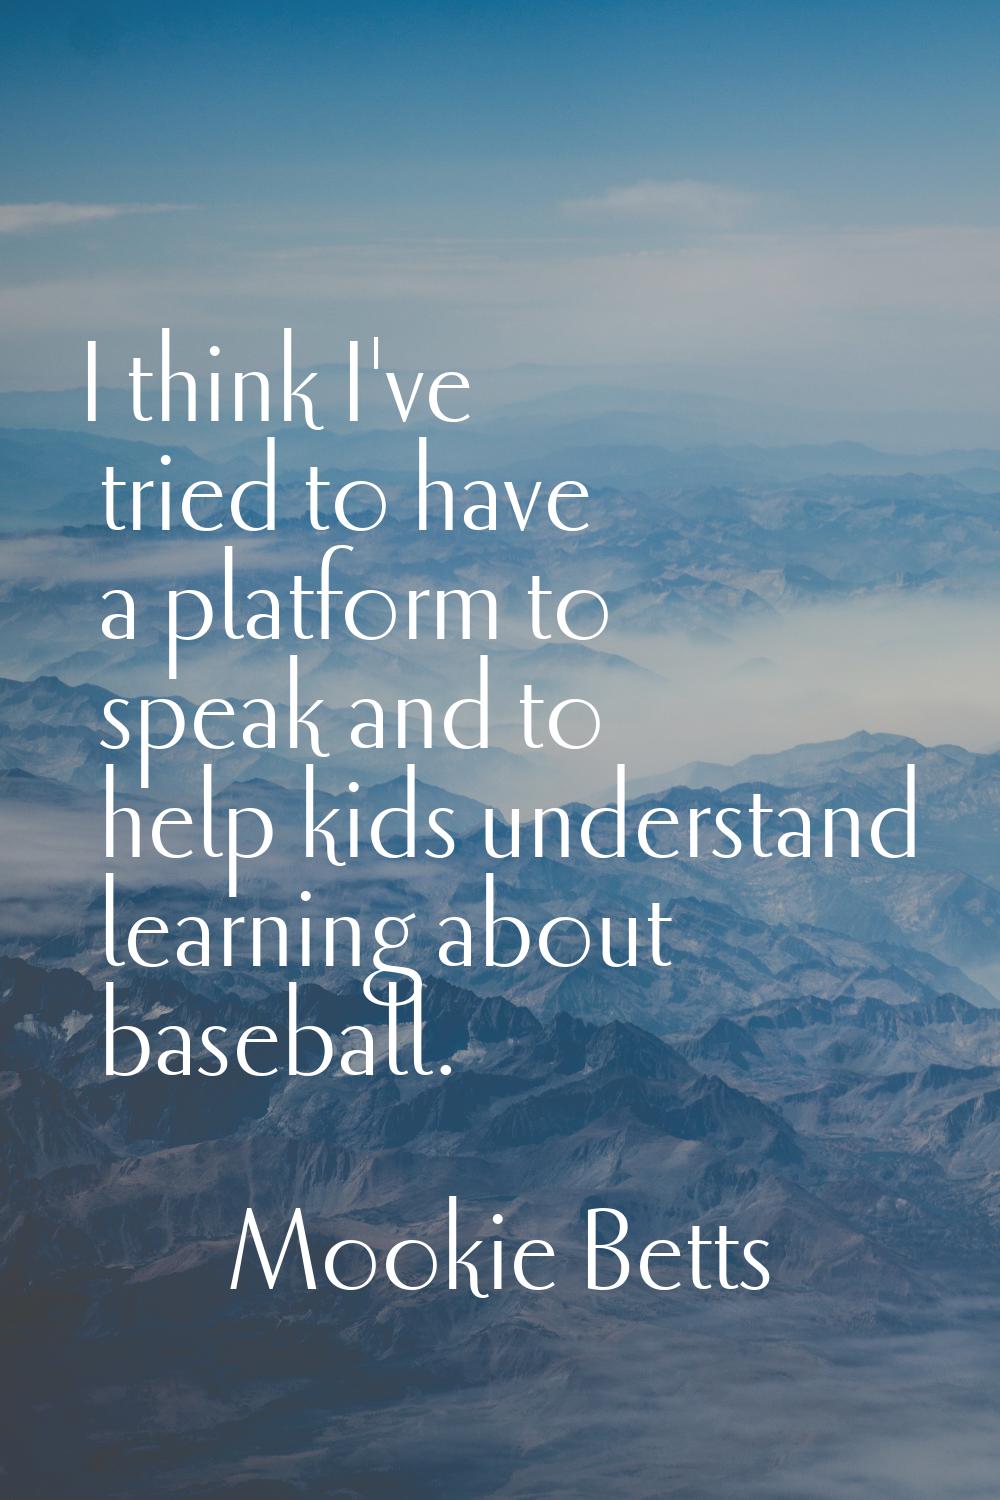 I think I've tried to have a platform to speak and to help kids understand learning about baseball.